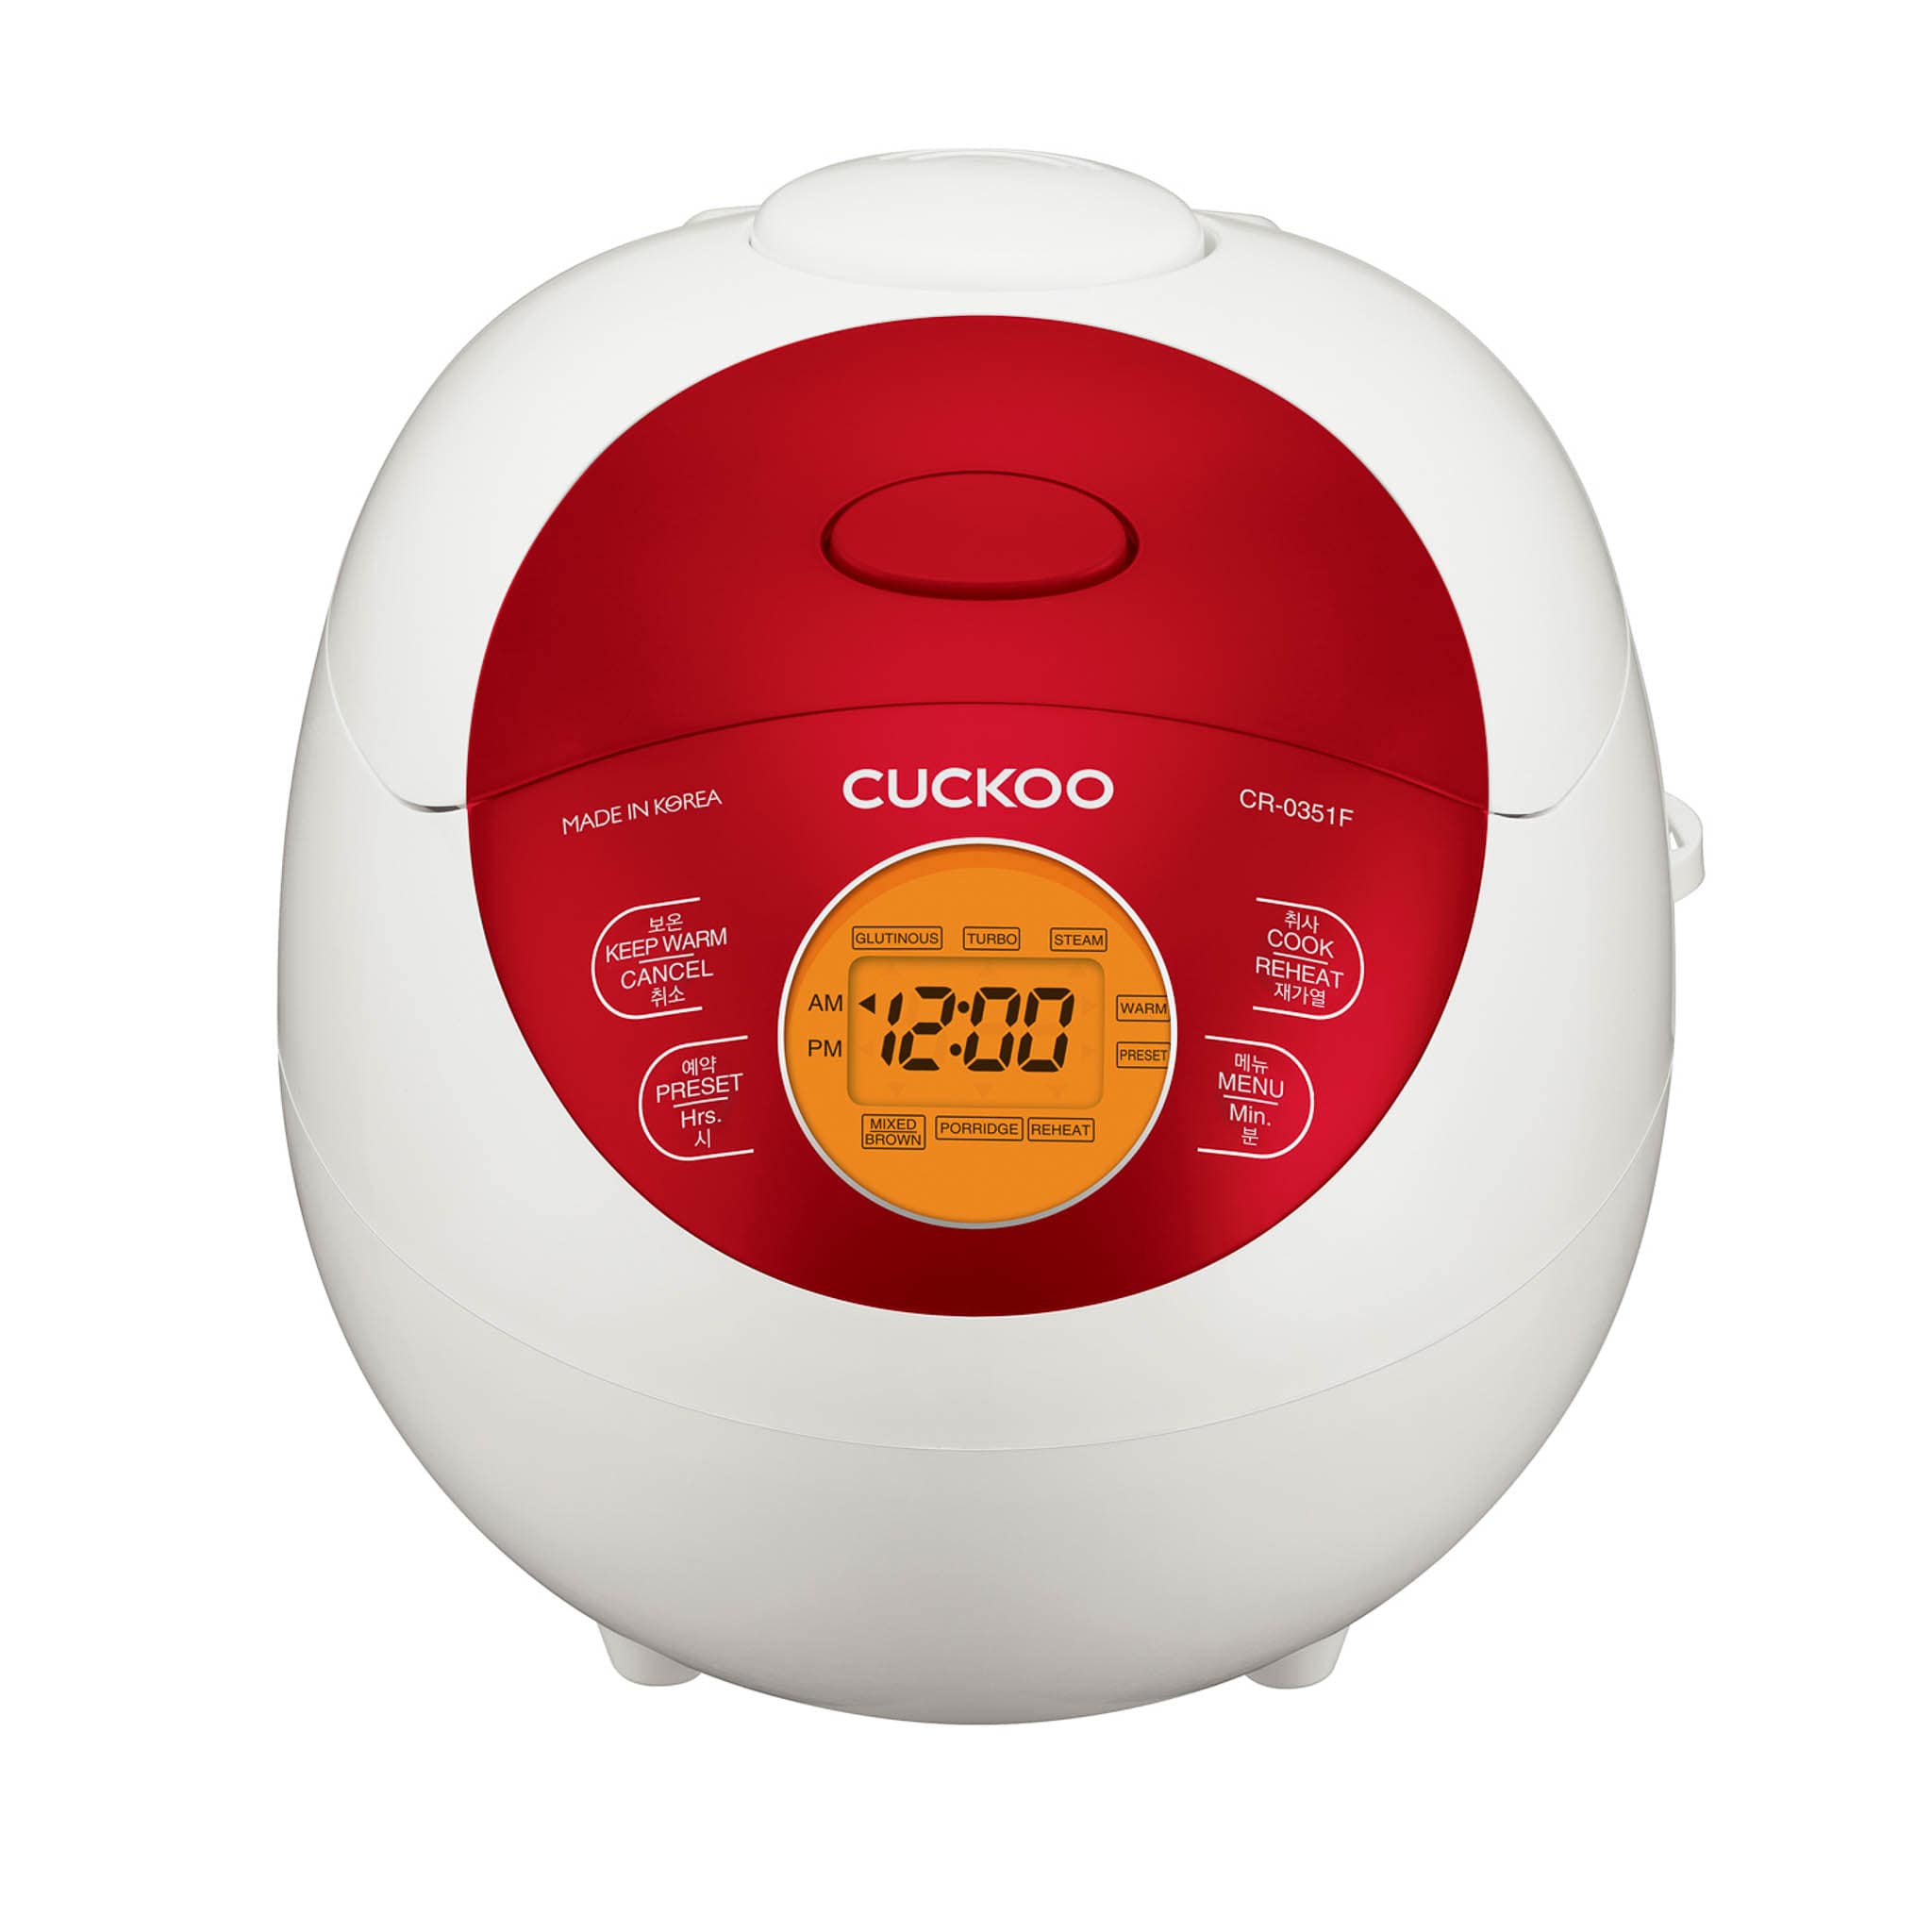 Cuckoo Electric Rice Cooker 0.5L - 3 Persons